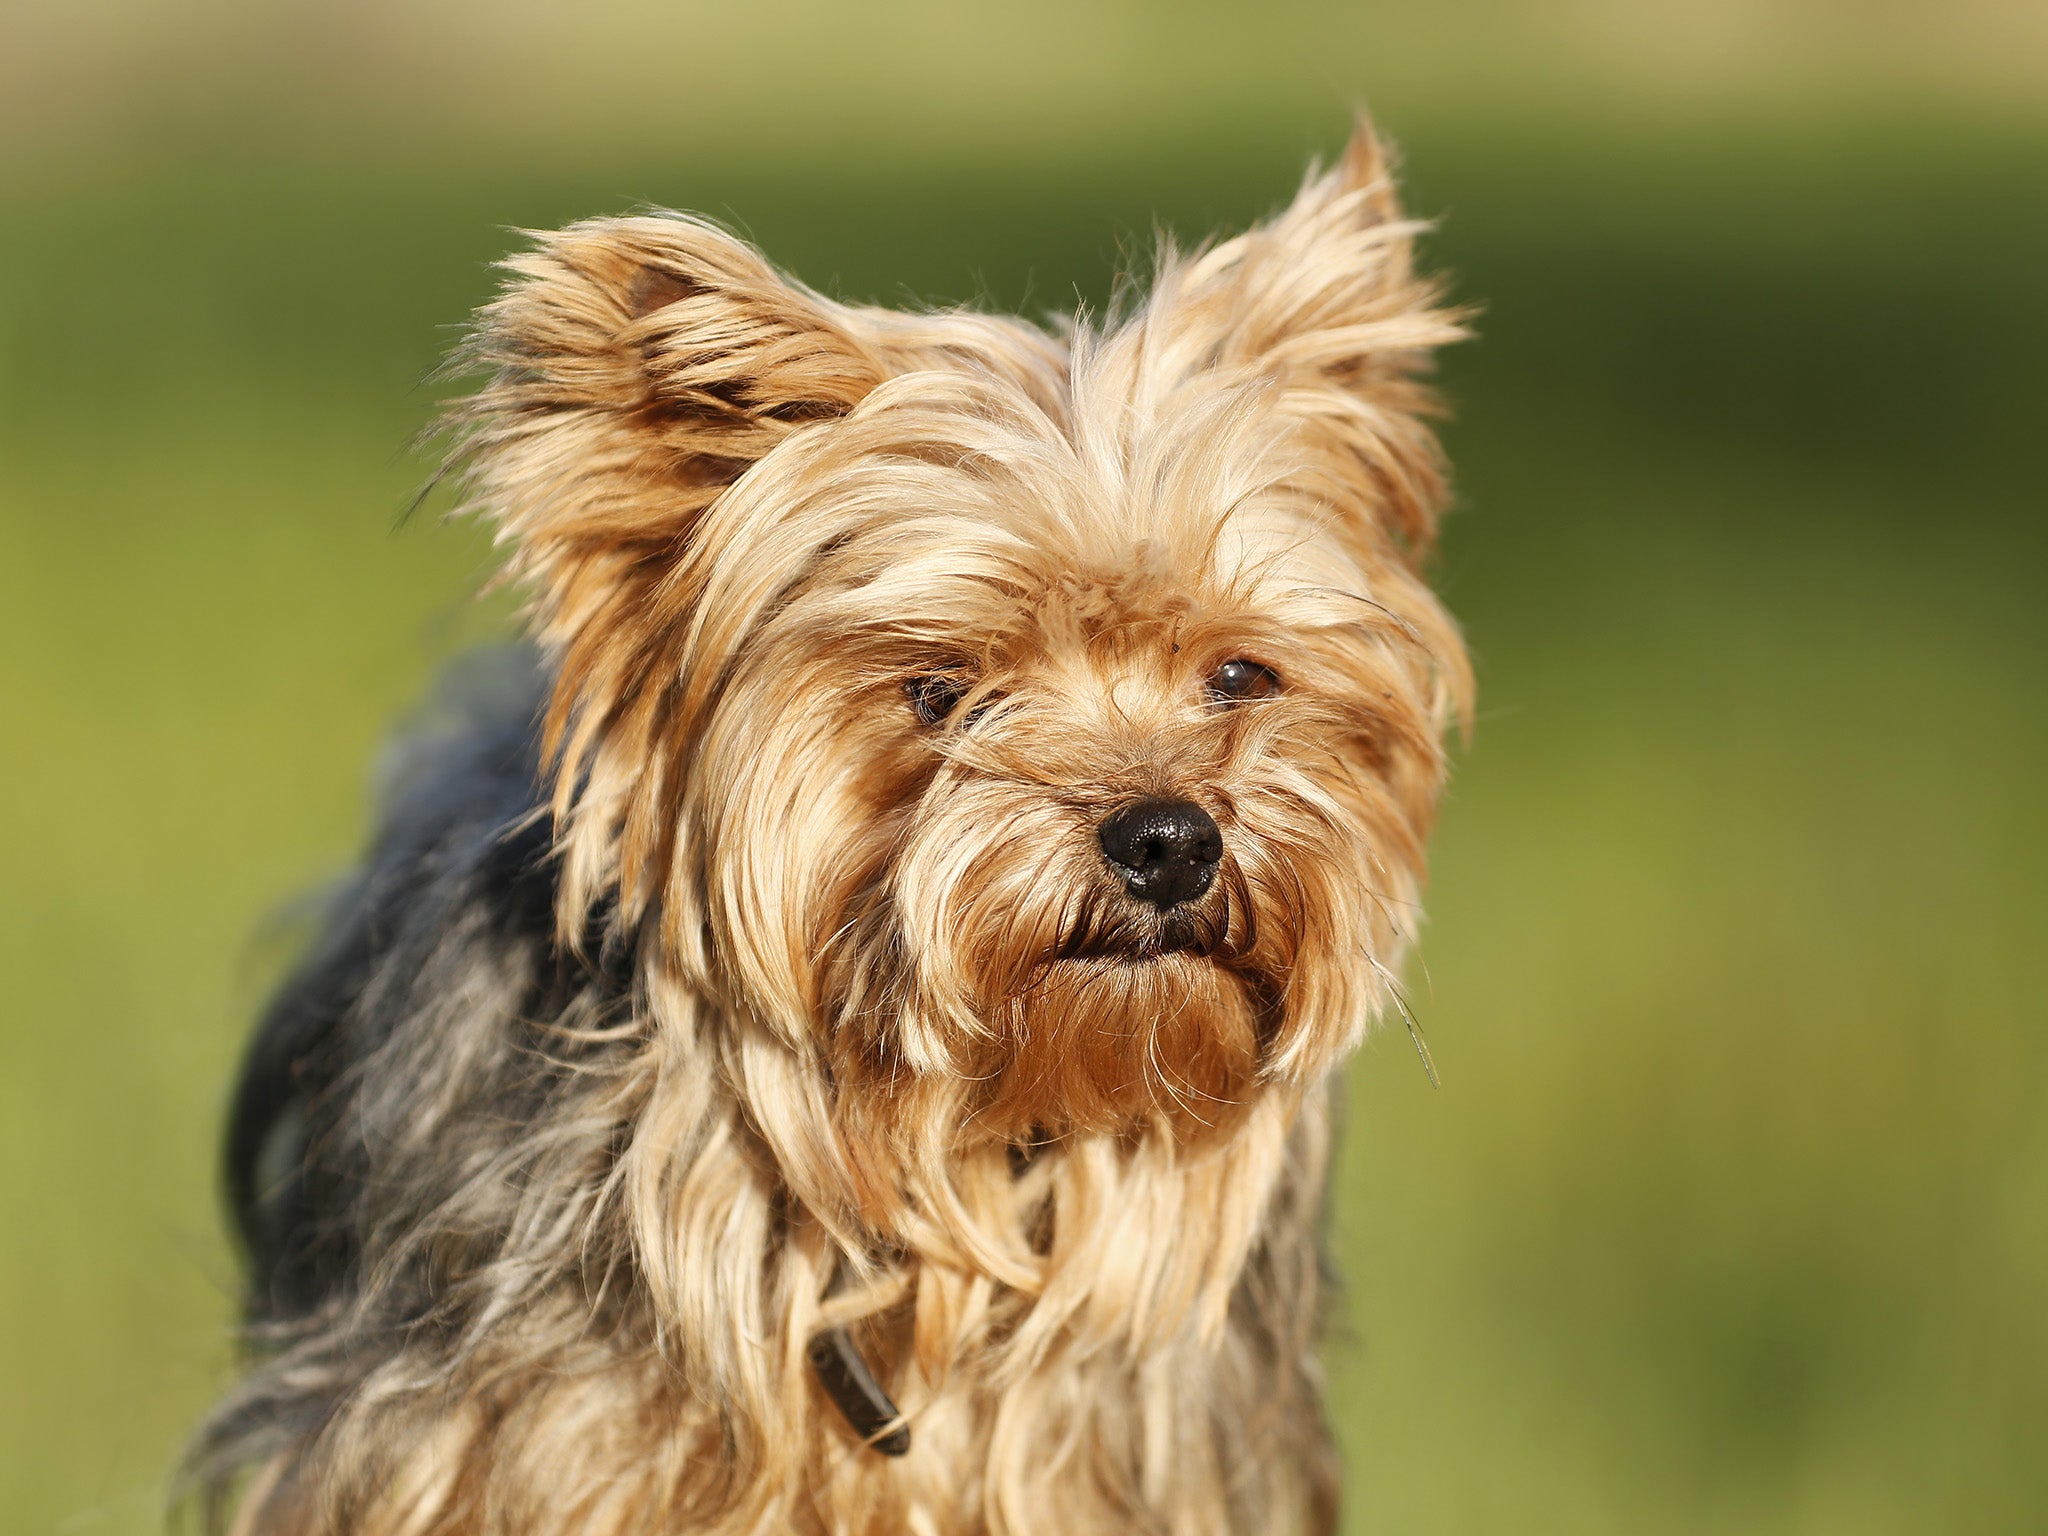 A Yorkshire terrier